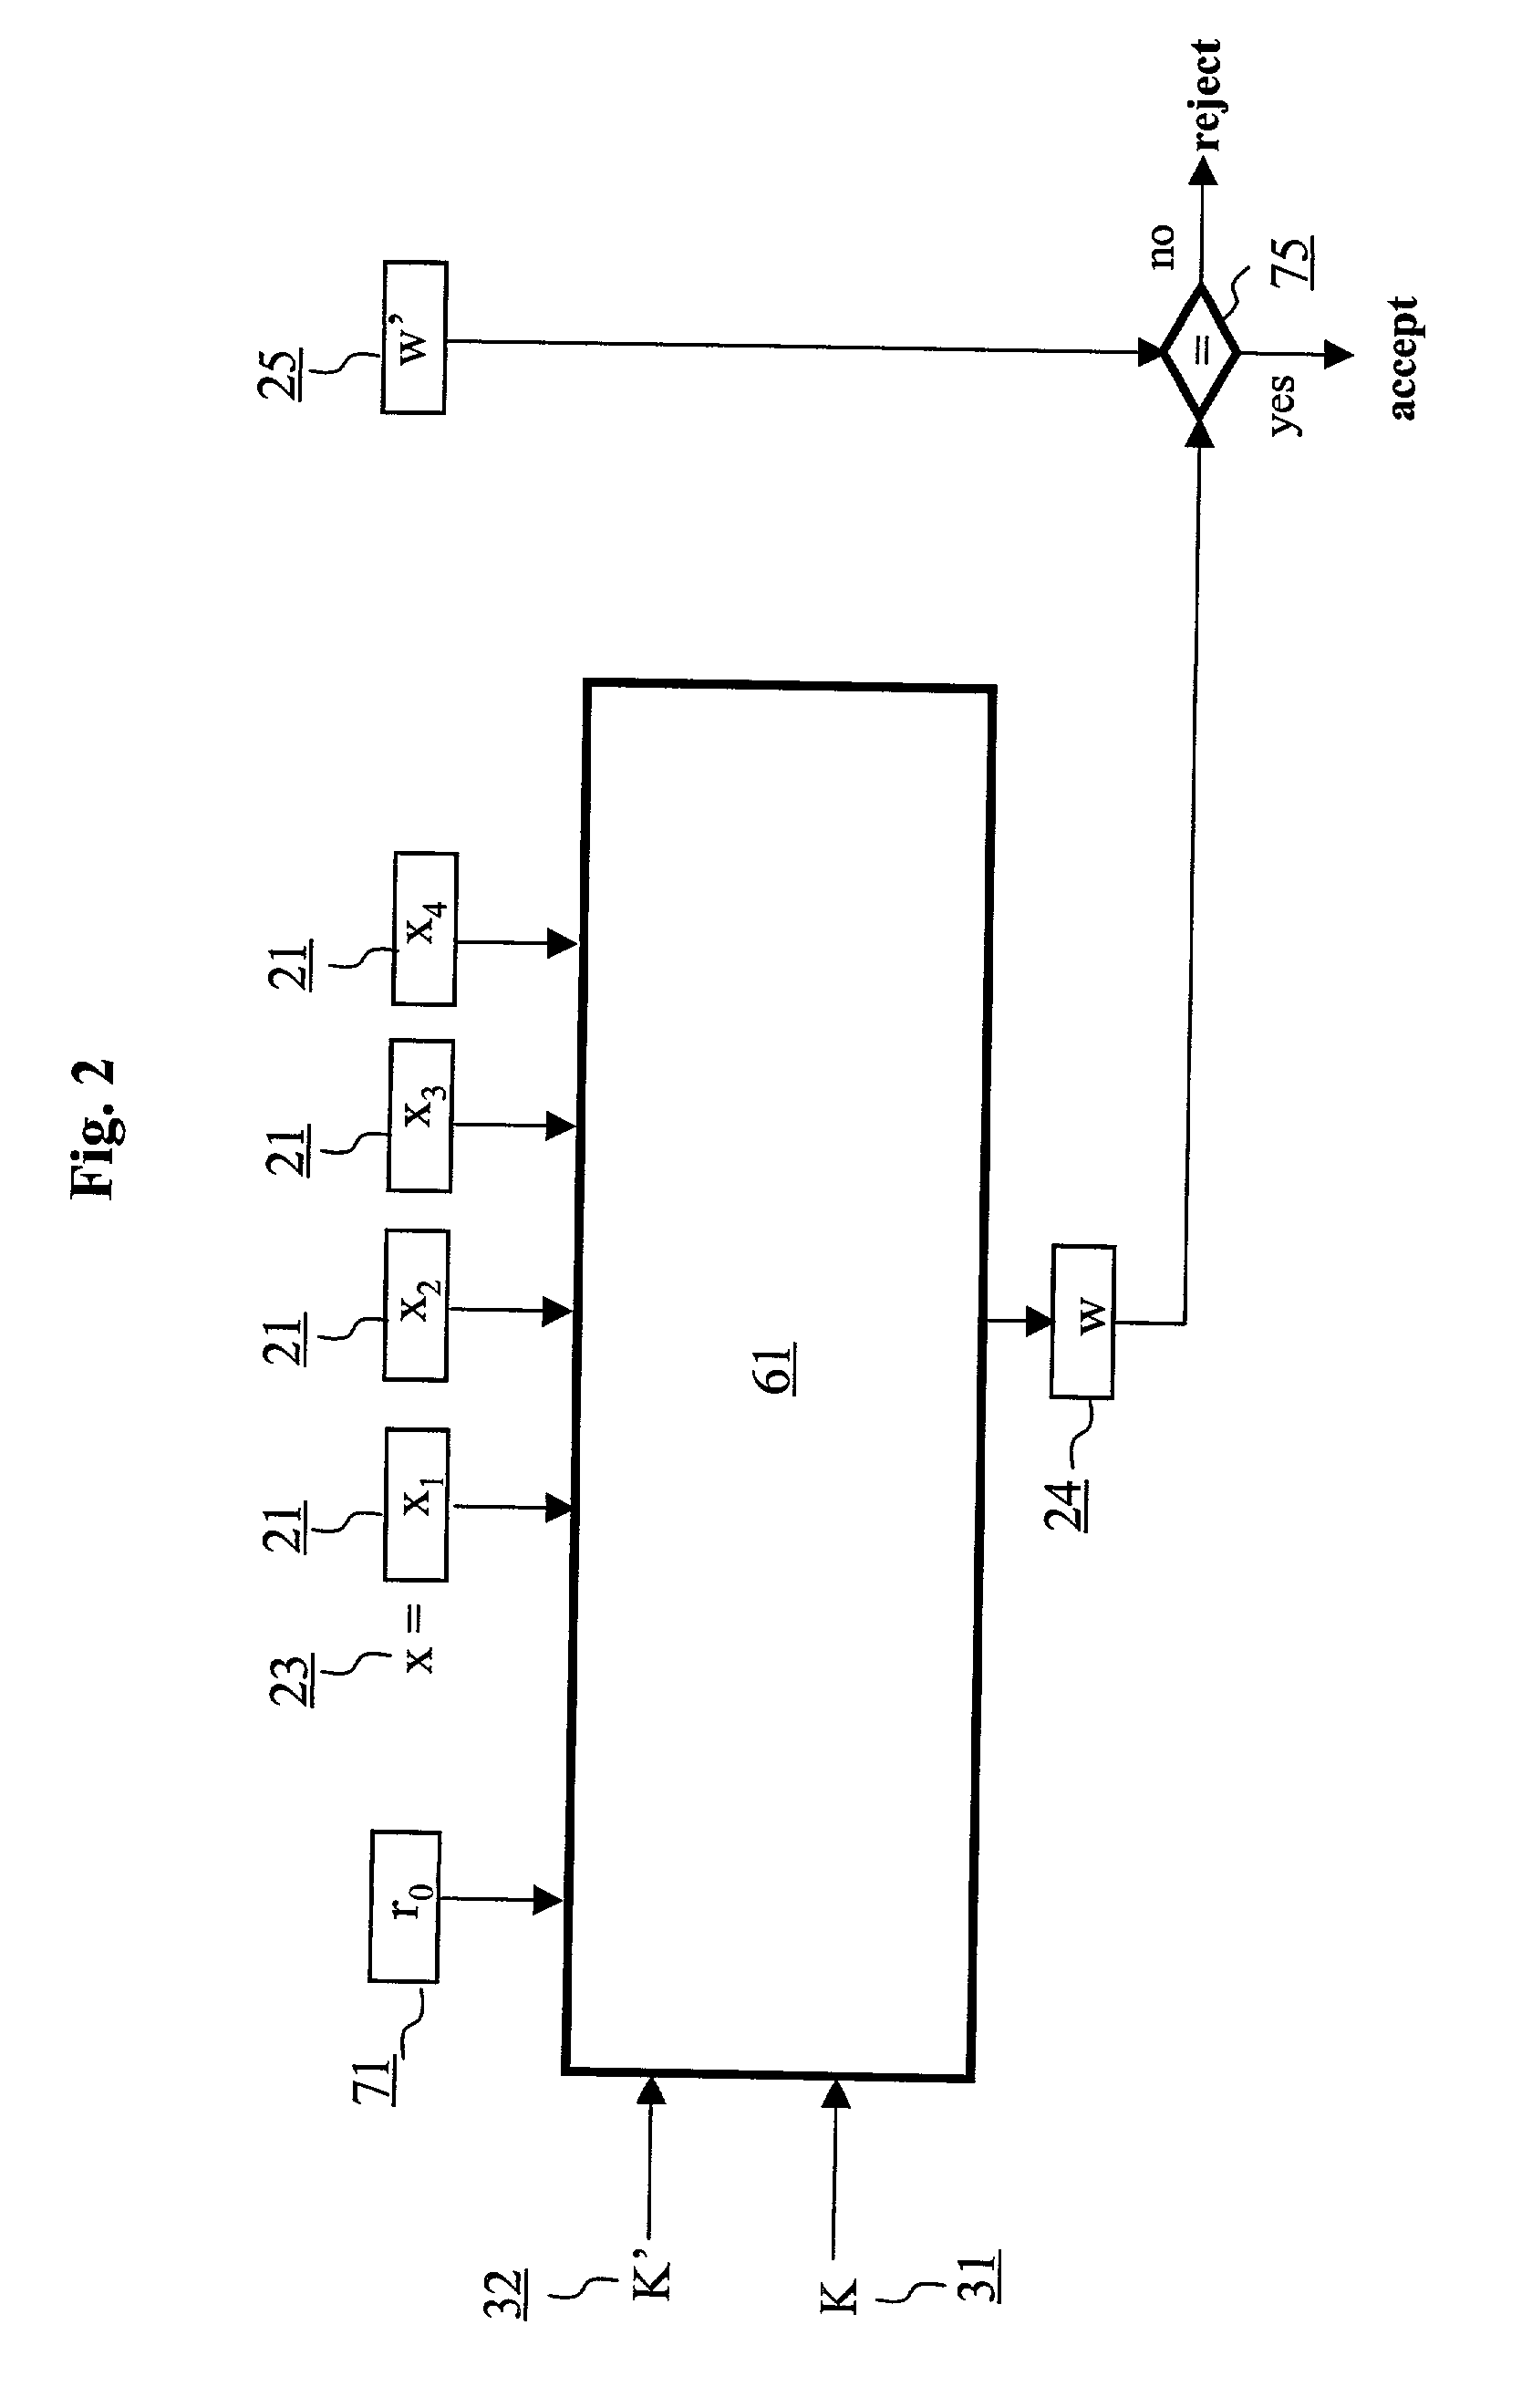 Authentication method and schemes for data integrity protection